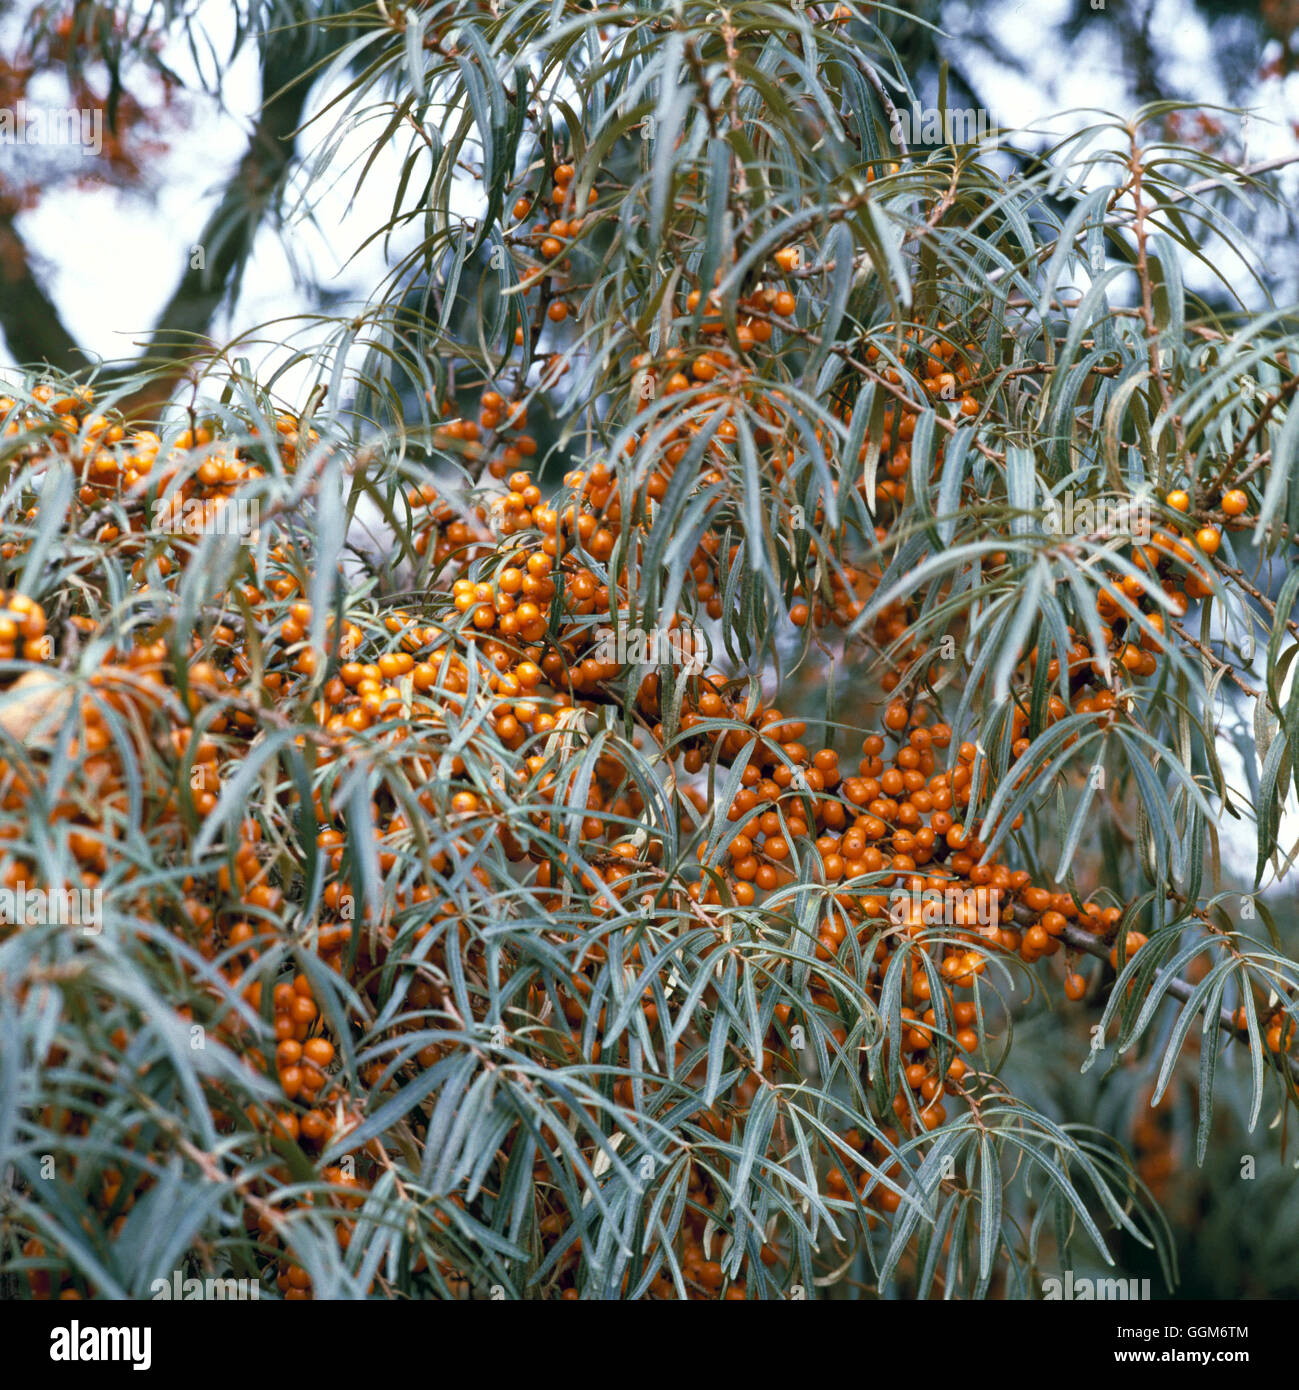 Hippophae rhamnoides nota AGM - bacche di olivello spinoso TRS008490 Foto Stock